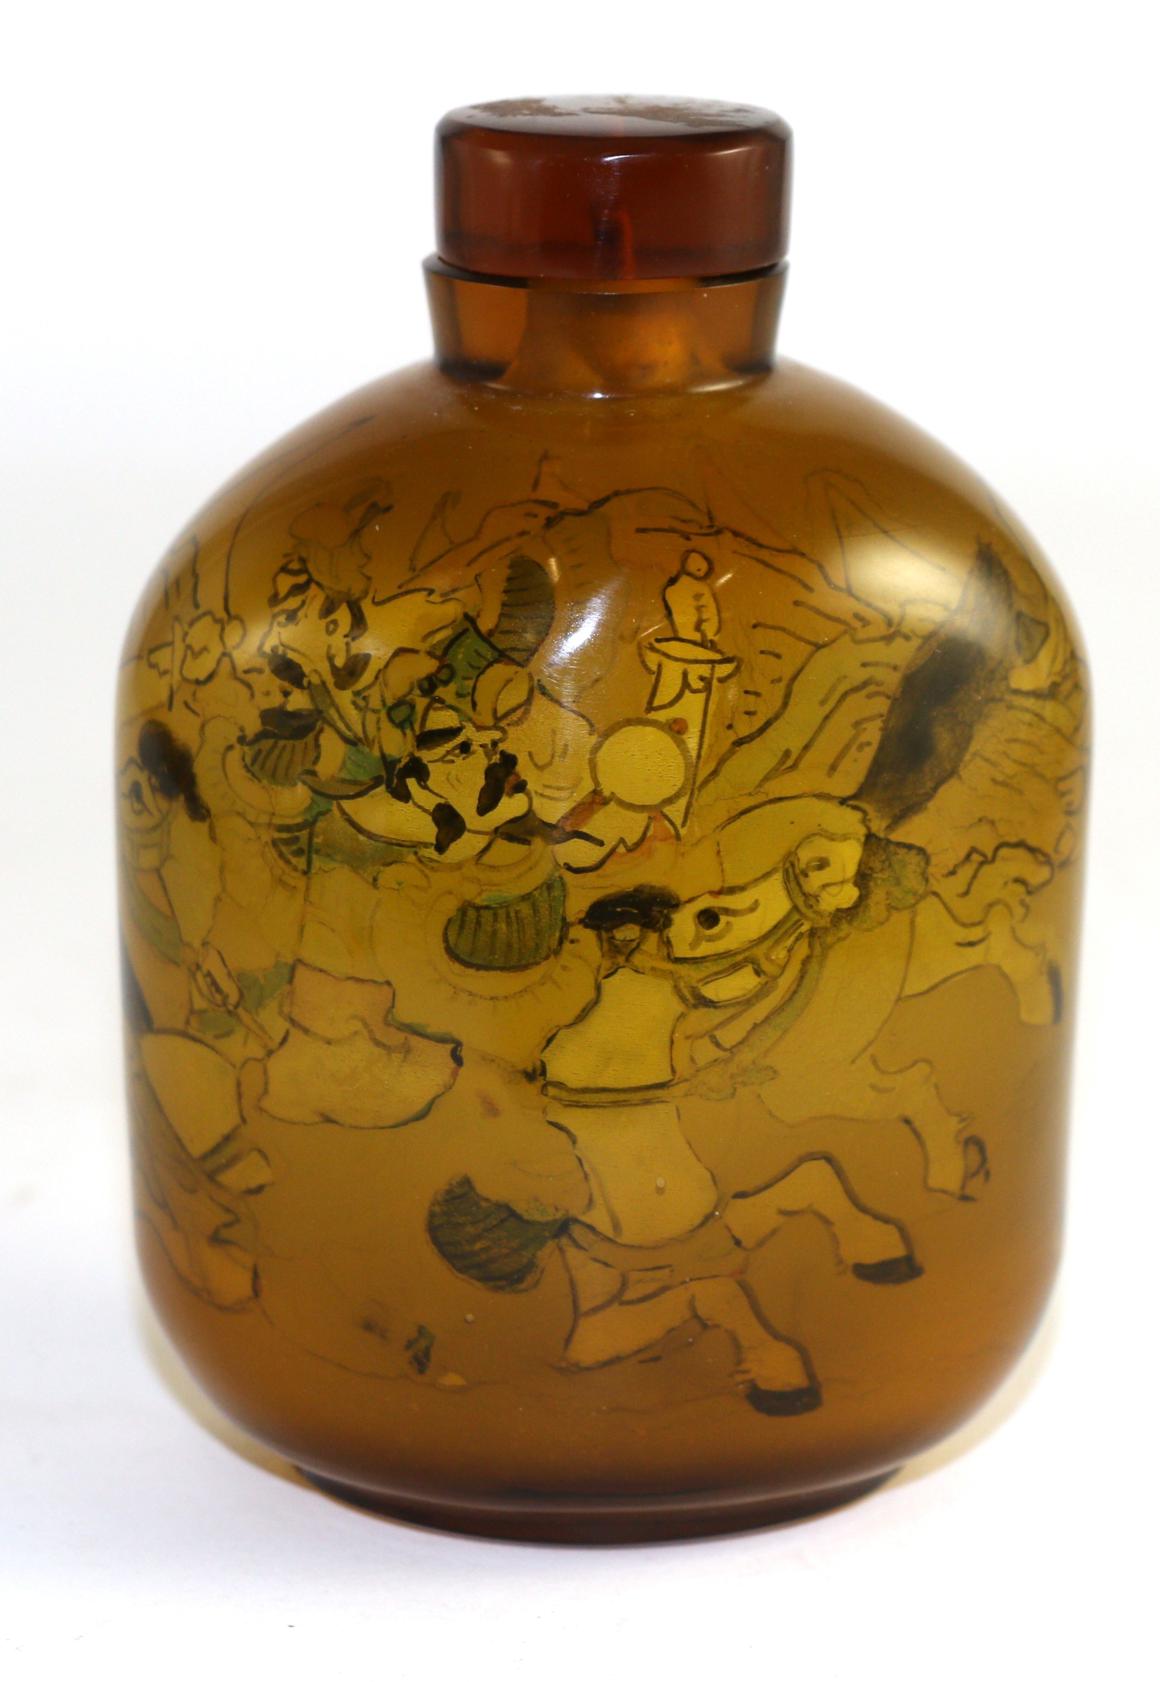 A large Chinese snuff bottle, 20th century, painted with warriors on horseback, bearing signature